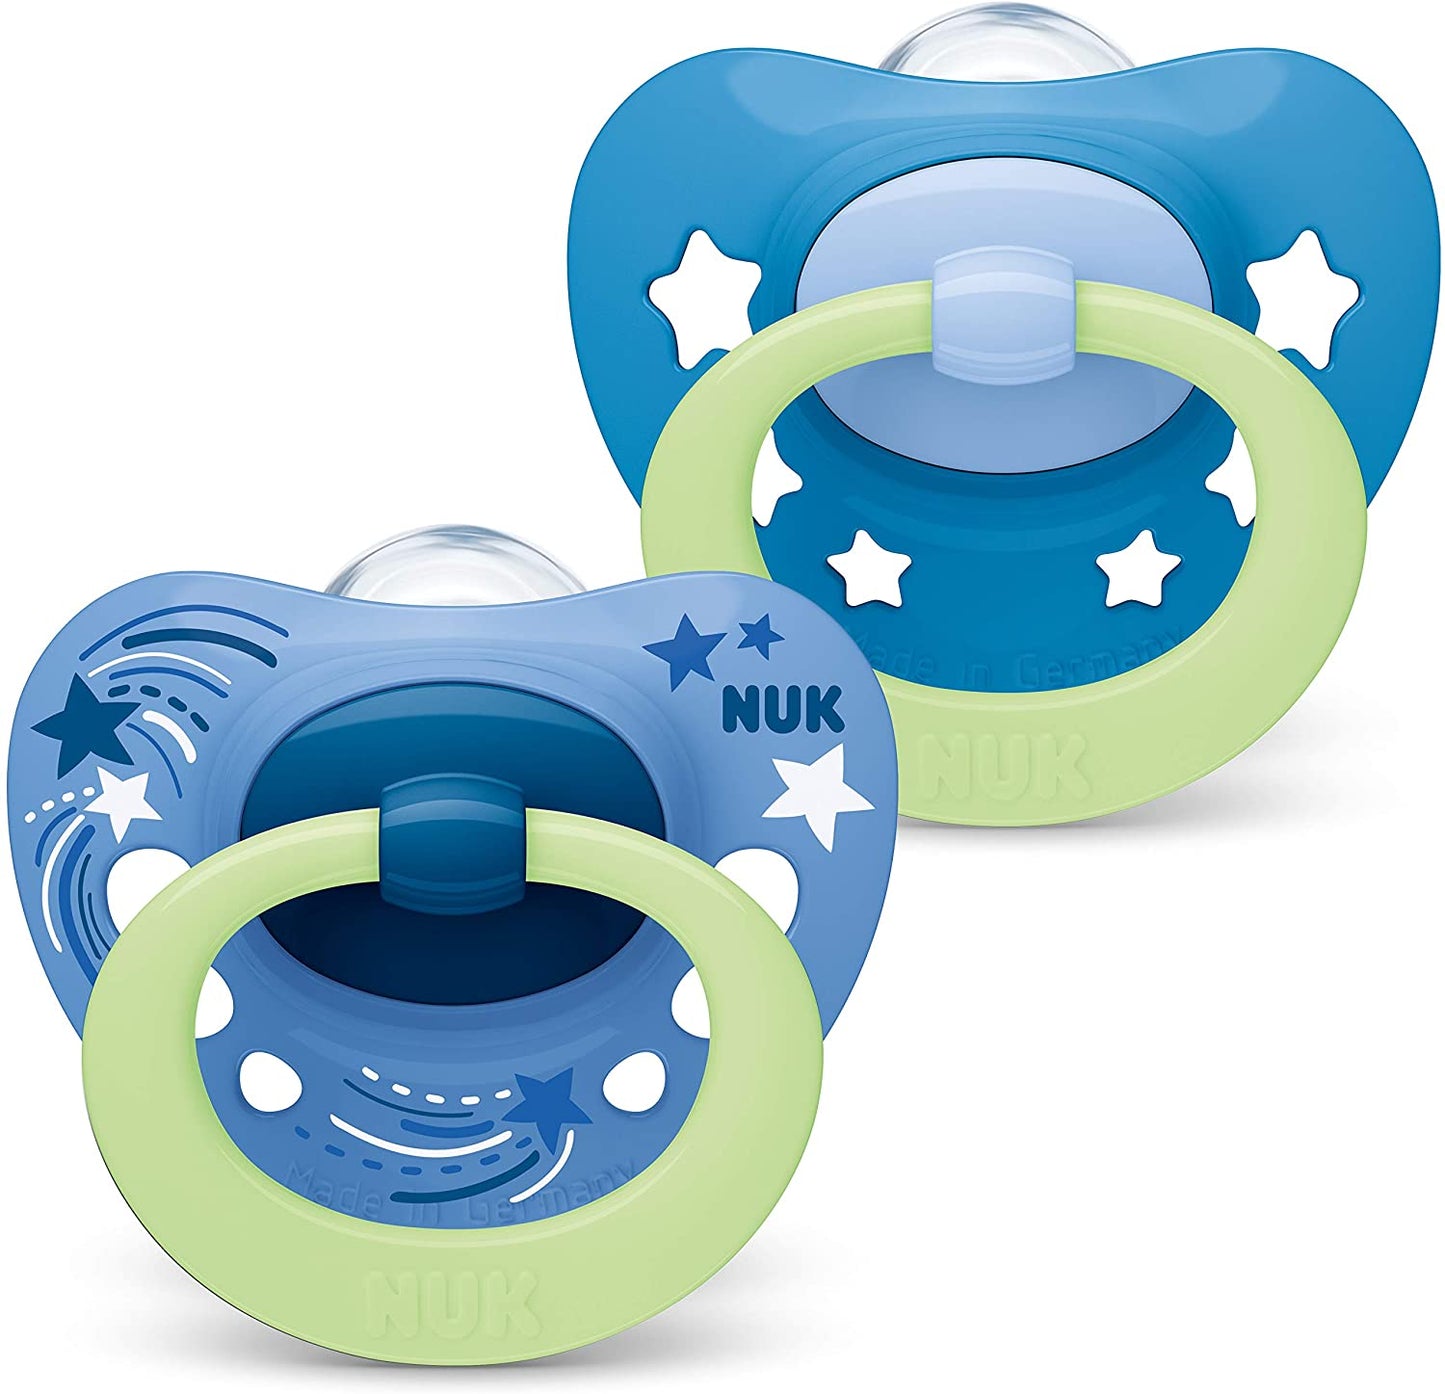 NUK Signature Night Silicone Soothers Blue 0-6 Months